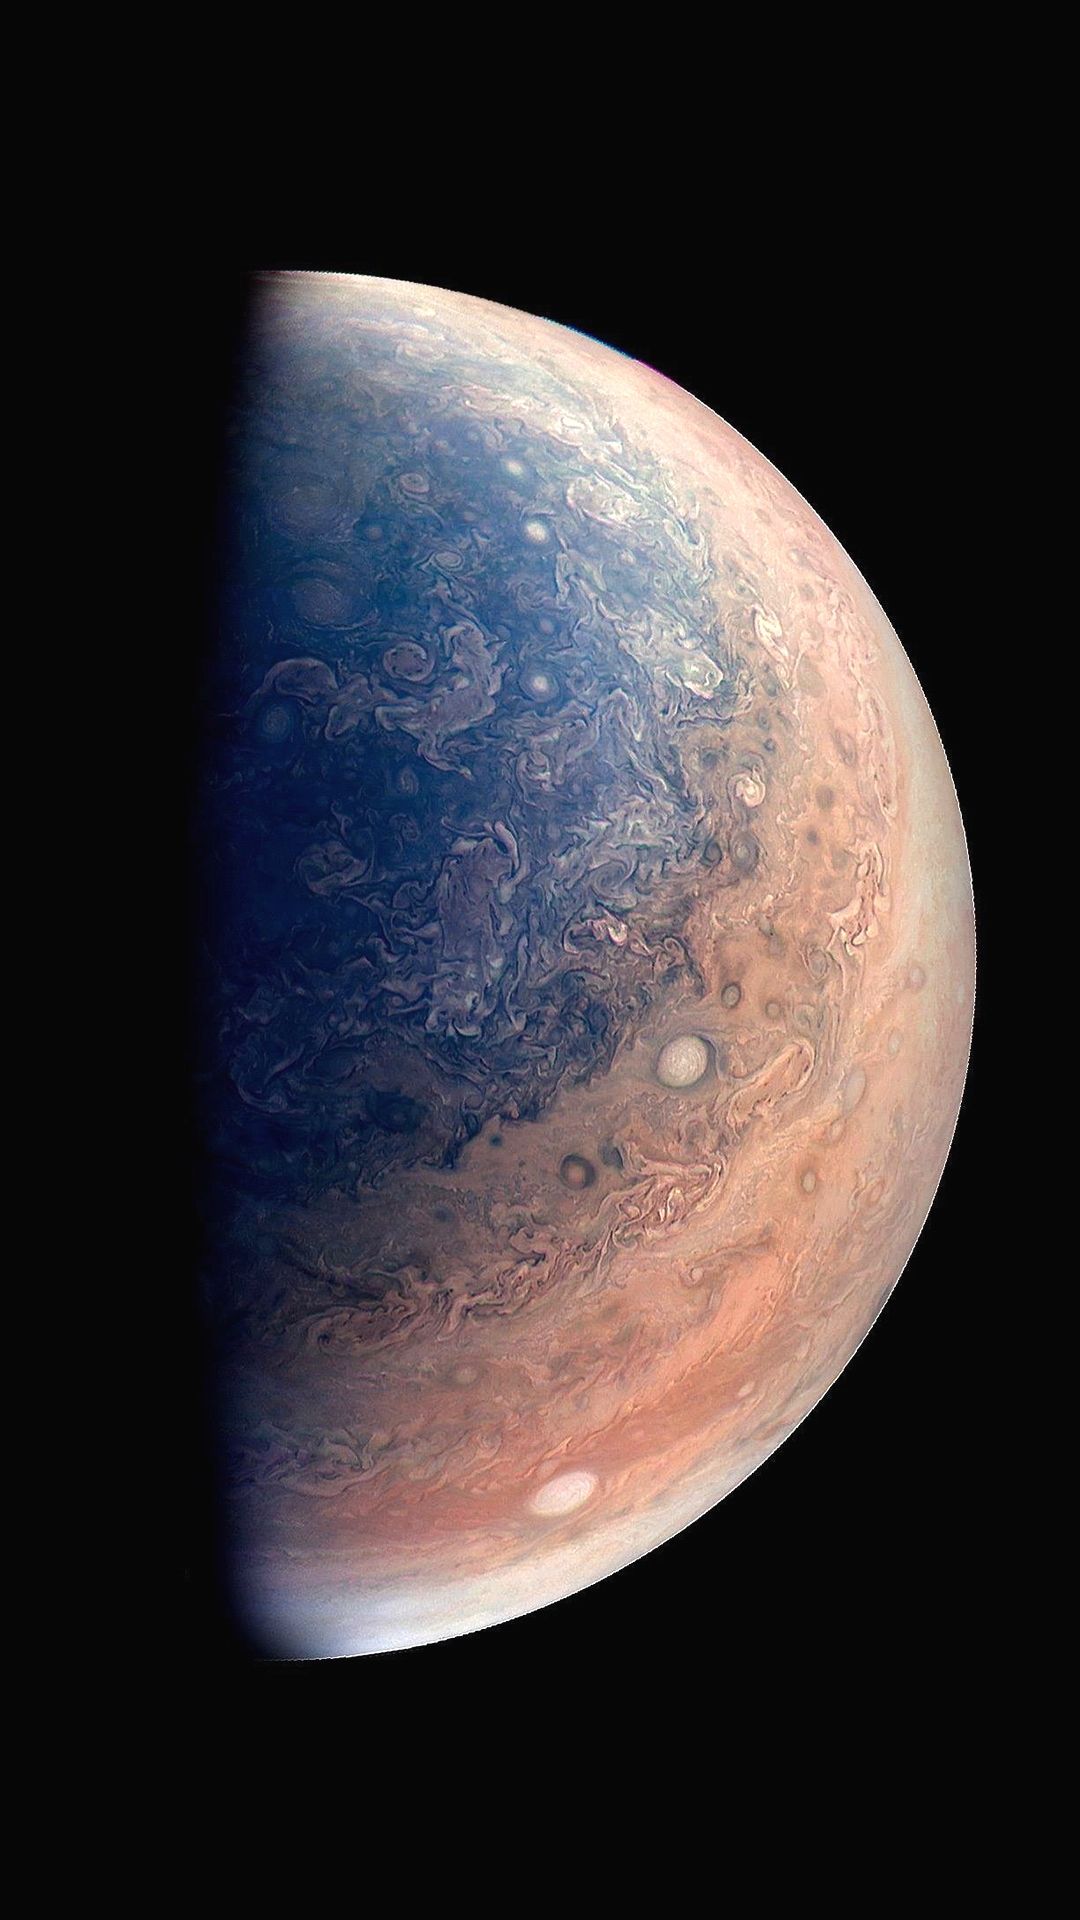 1080x1920 Awesome Iphone X Wallpaper Jupiter